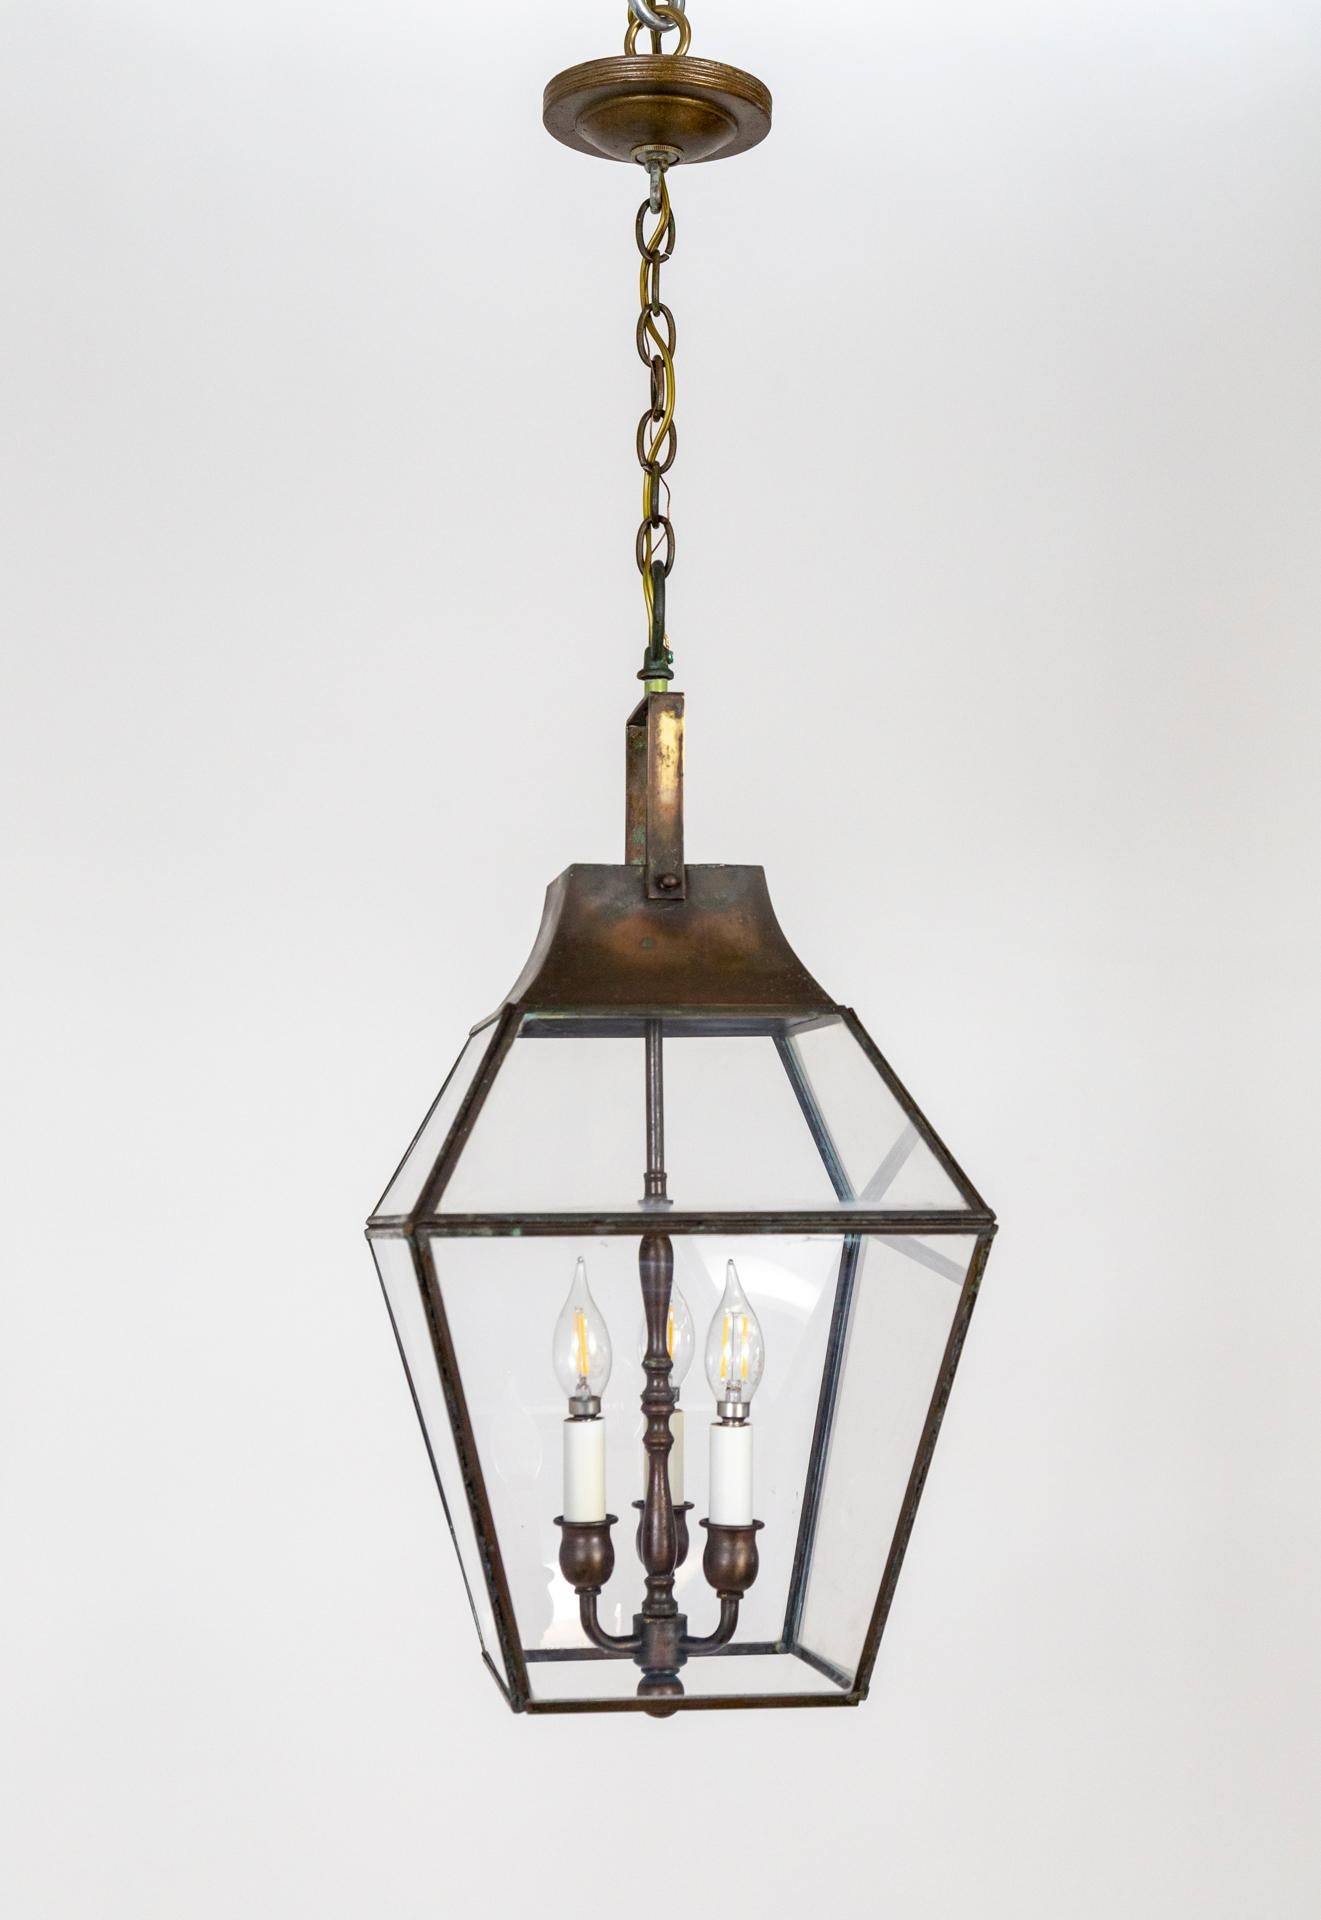 A geometric copper lantern with a bronzed finish, plexiglass windows, and 3 candelabra lights held inside by a turned-style stem; topped with a cap and handle.  With new candle covers, chain, and canopy. Newly rewired. 11.5